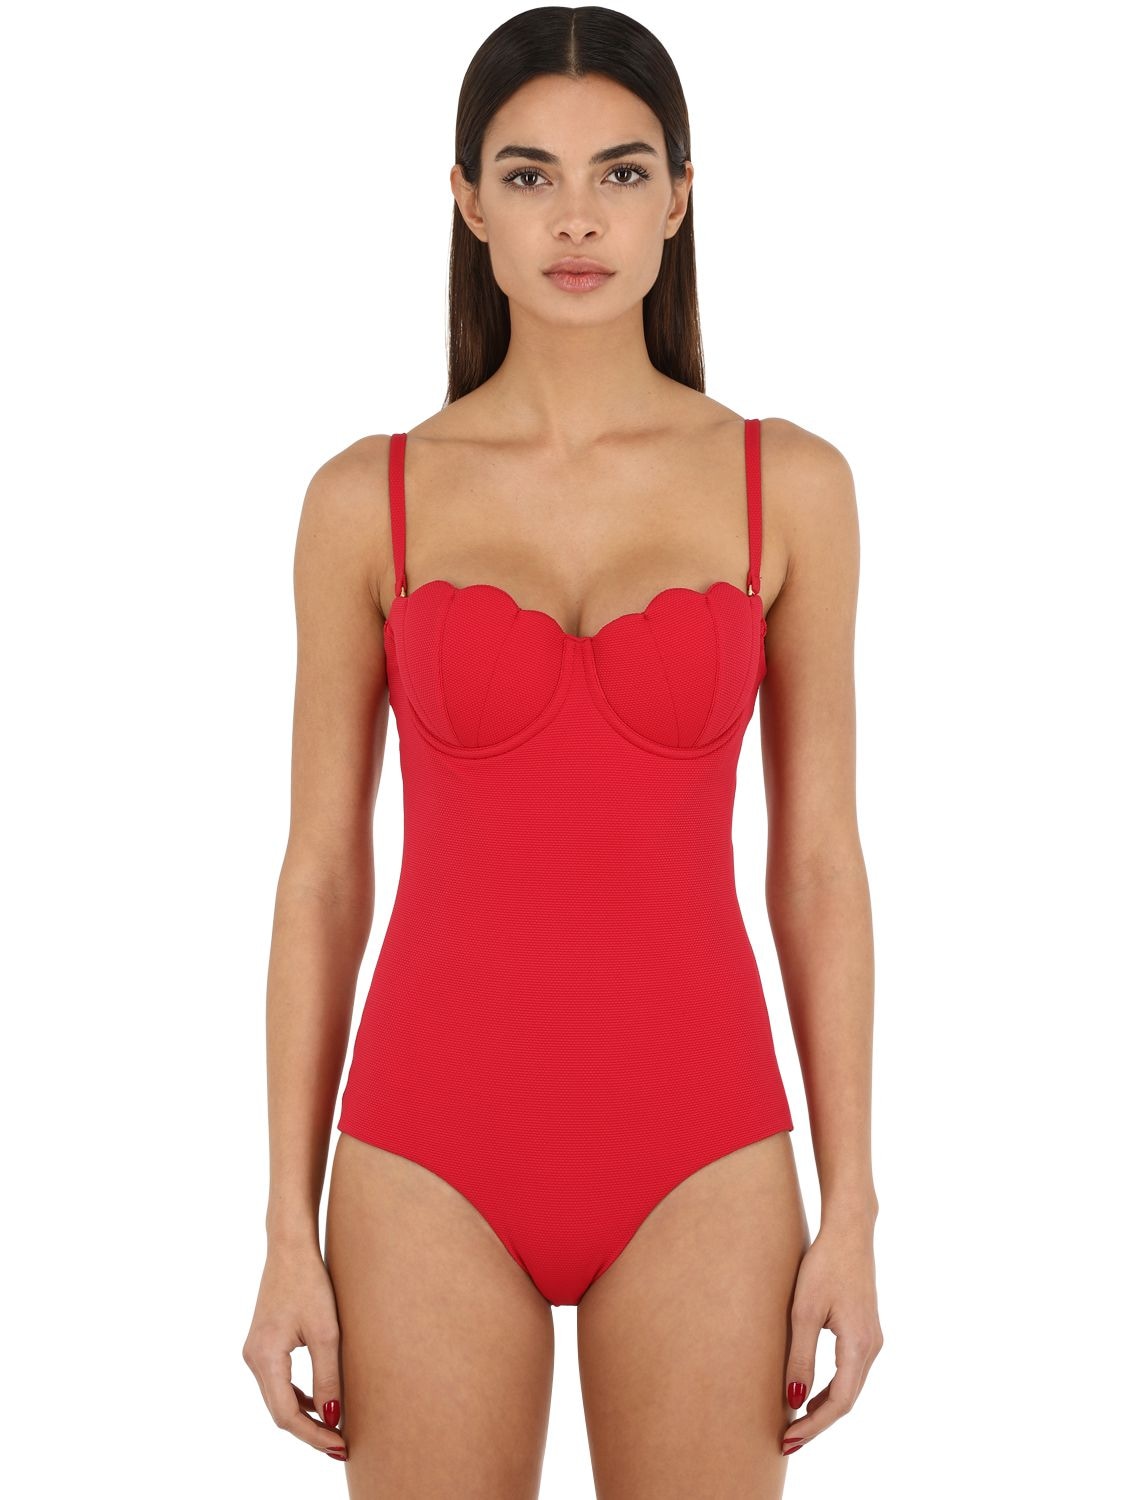 Arabella London The Contour One Piece Swimsuit In Red